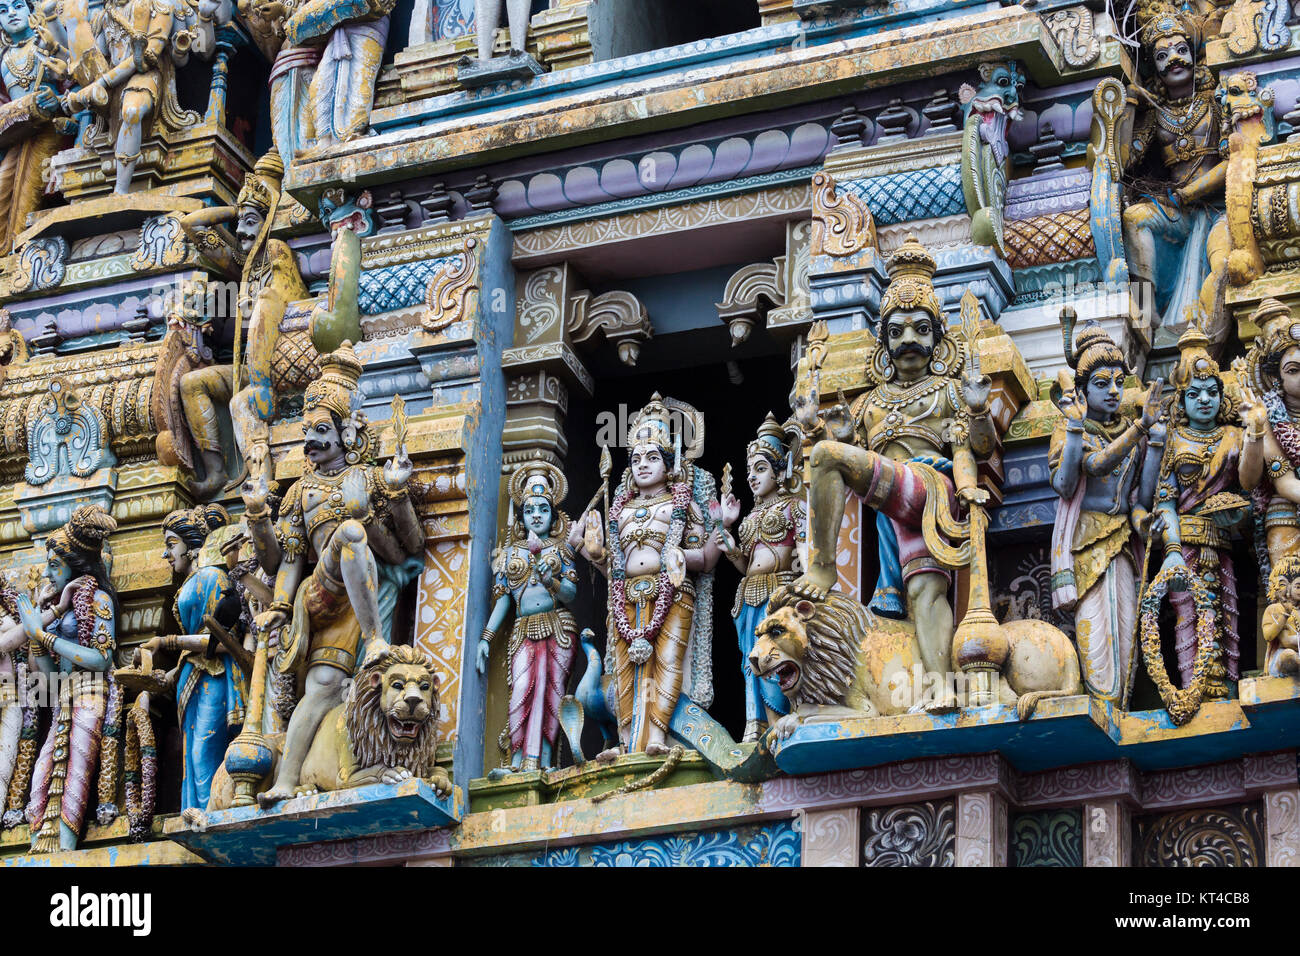 Closeup details on the tower of a Hindu Temple dedicated to Lord Shiva in Colombo, Sri Lanka. Stock Photo